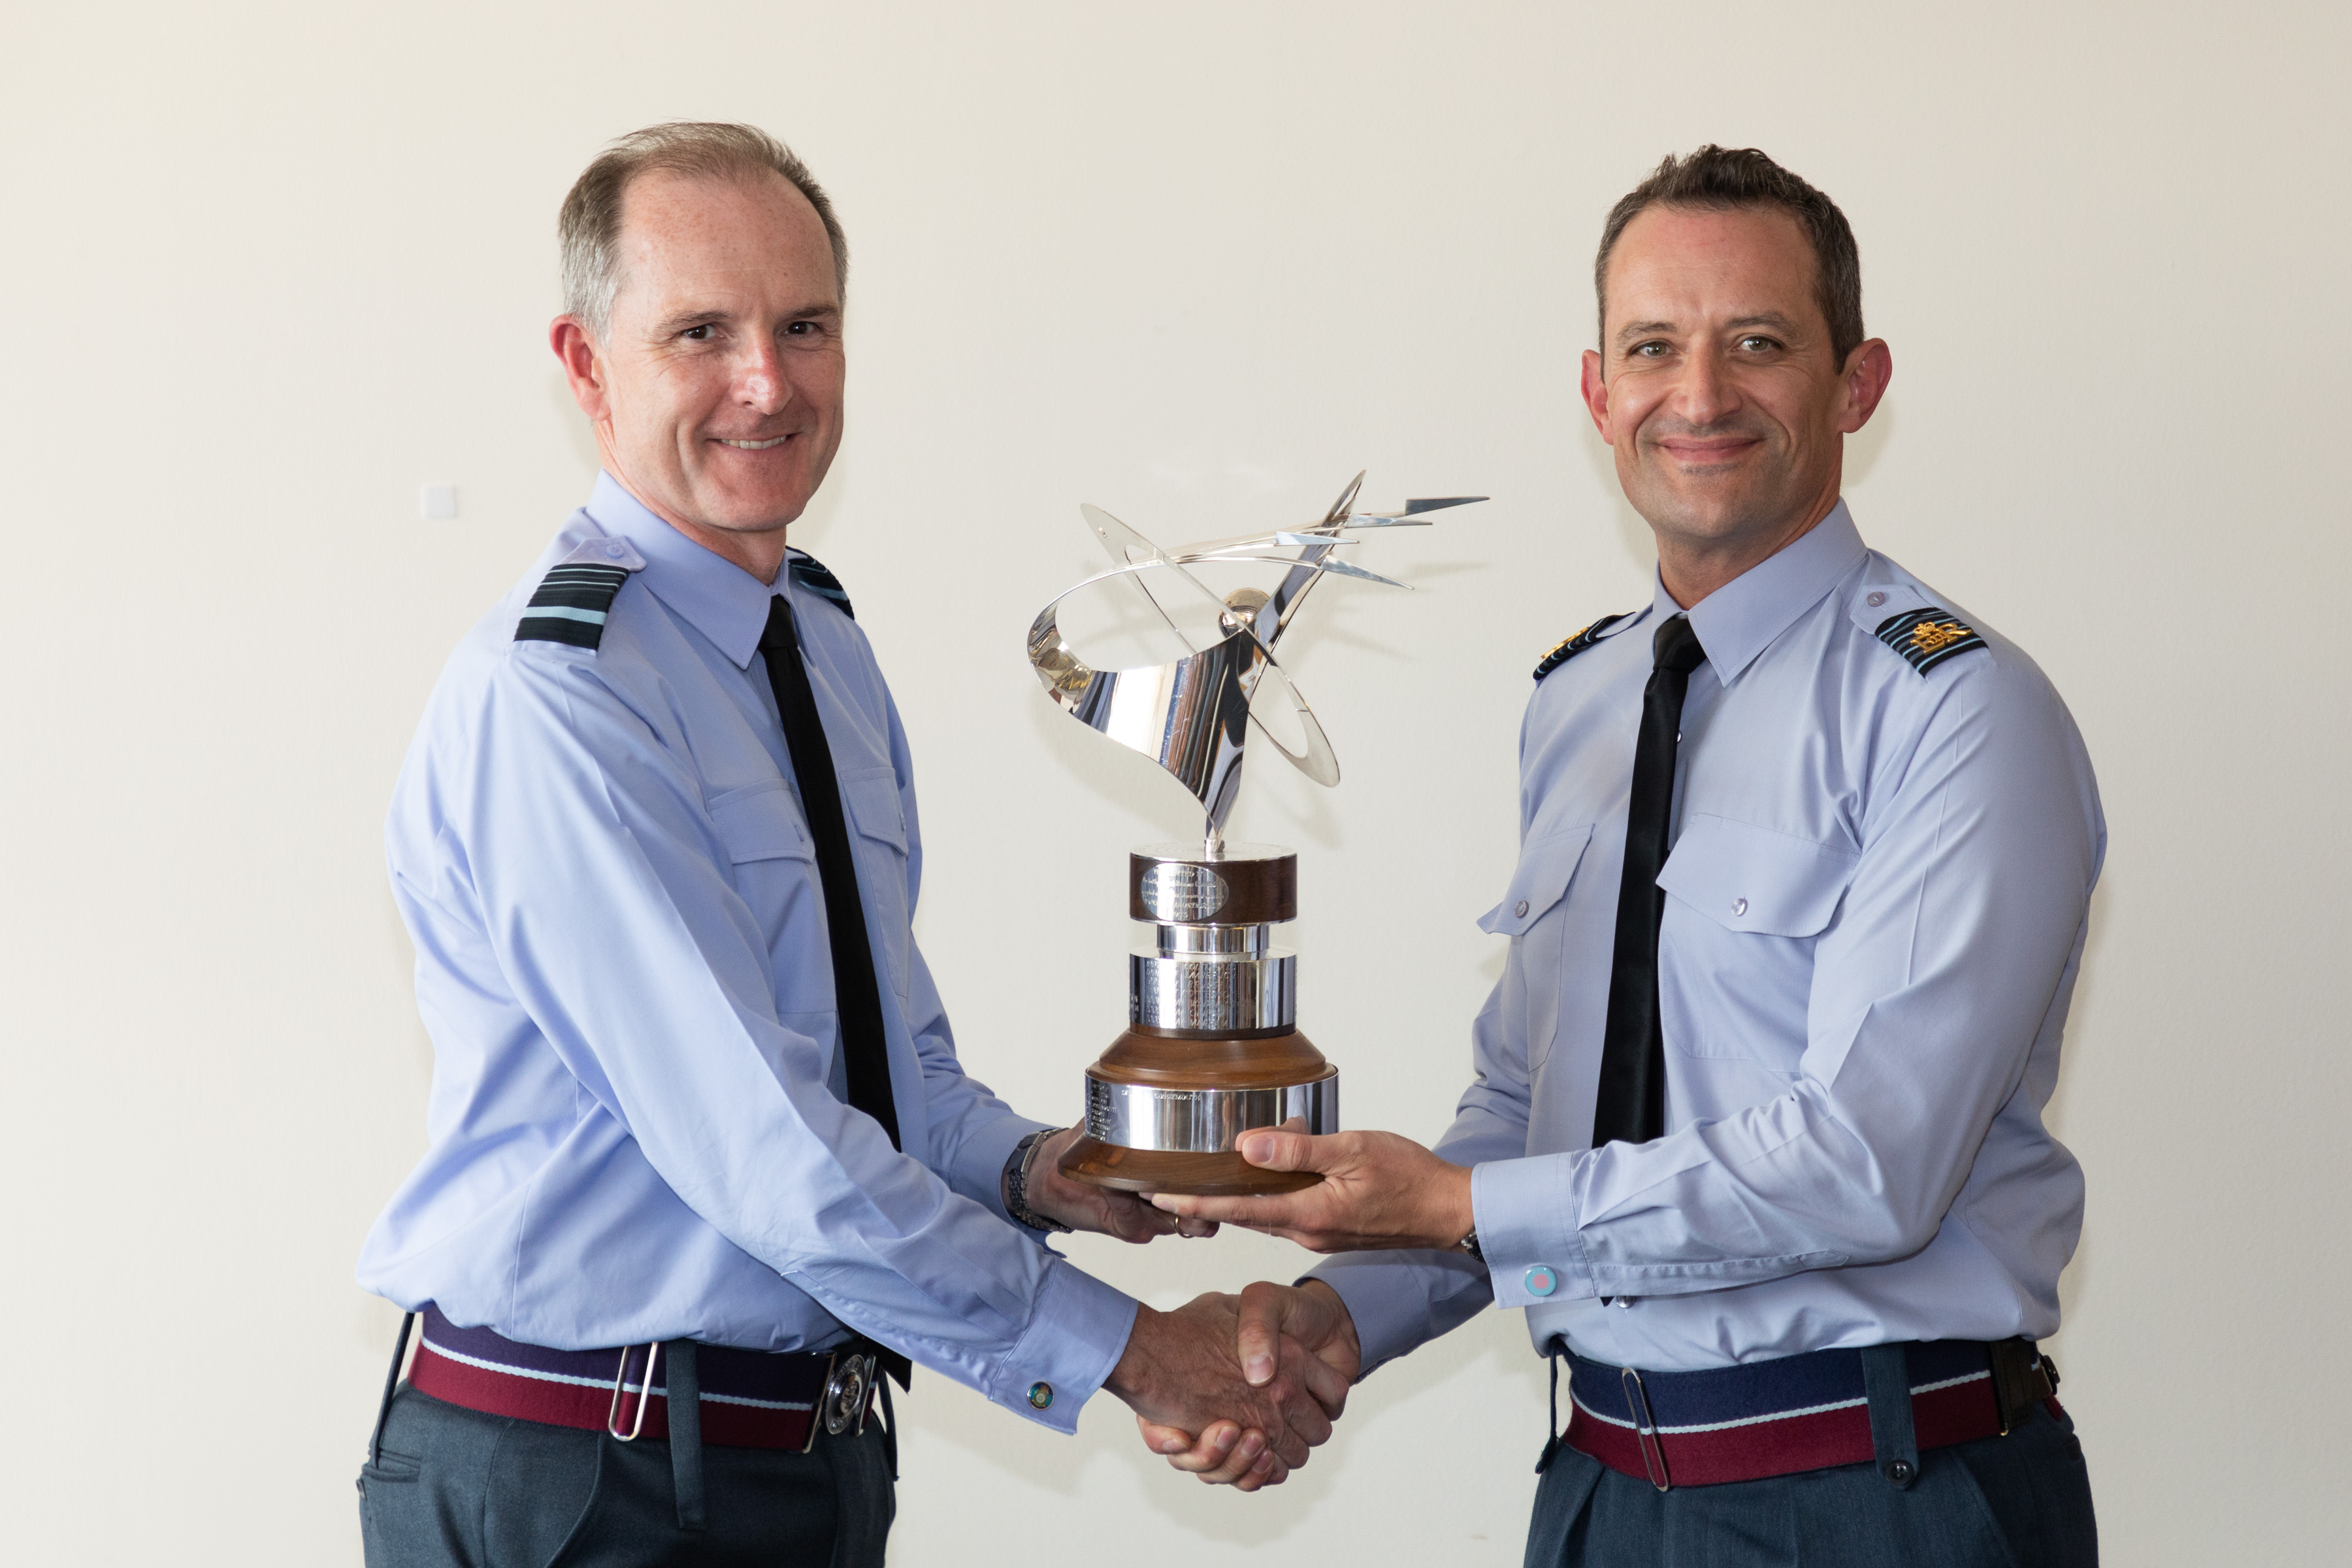 Image shows RAF aviators shaking hands while holding trophy.